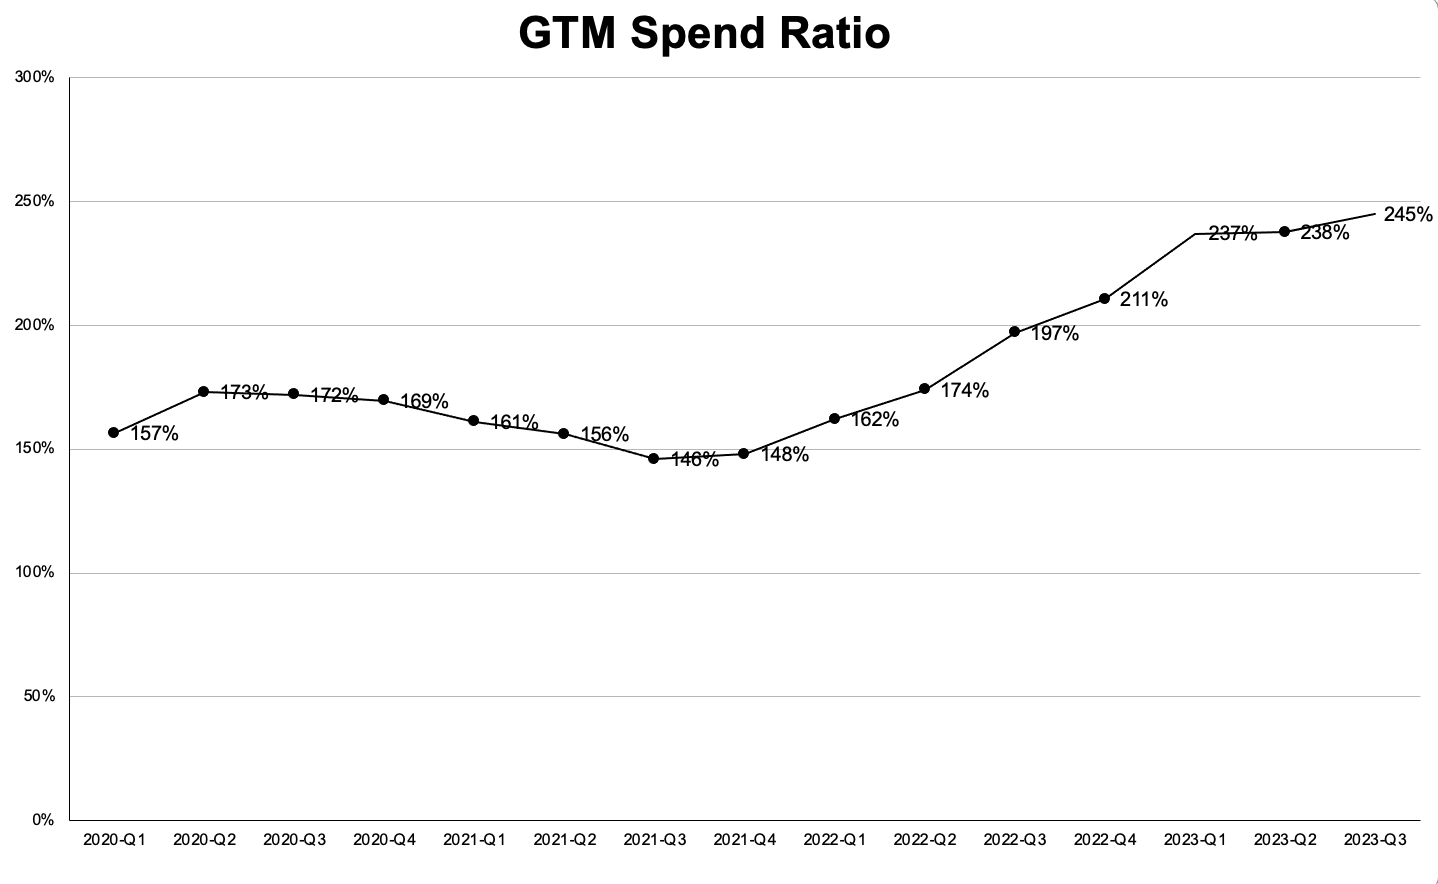 A graph of GTM Spend Ratio from 2020-2023